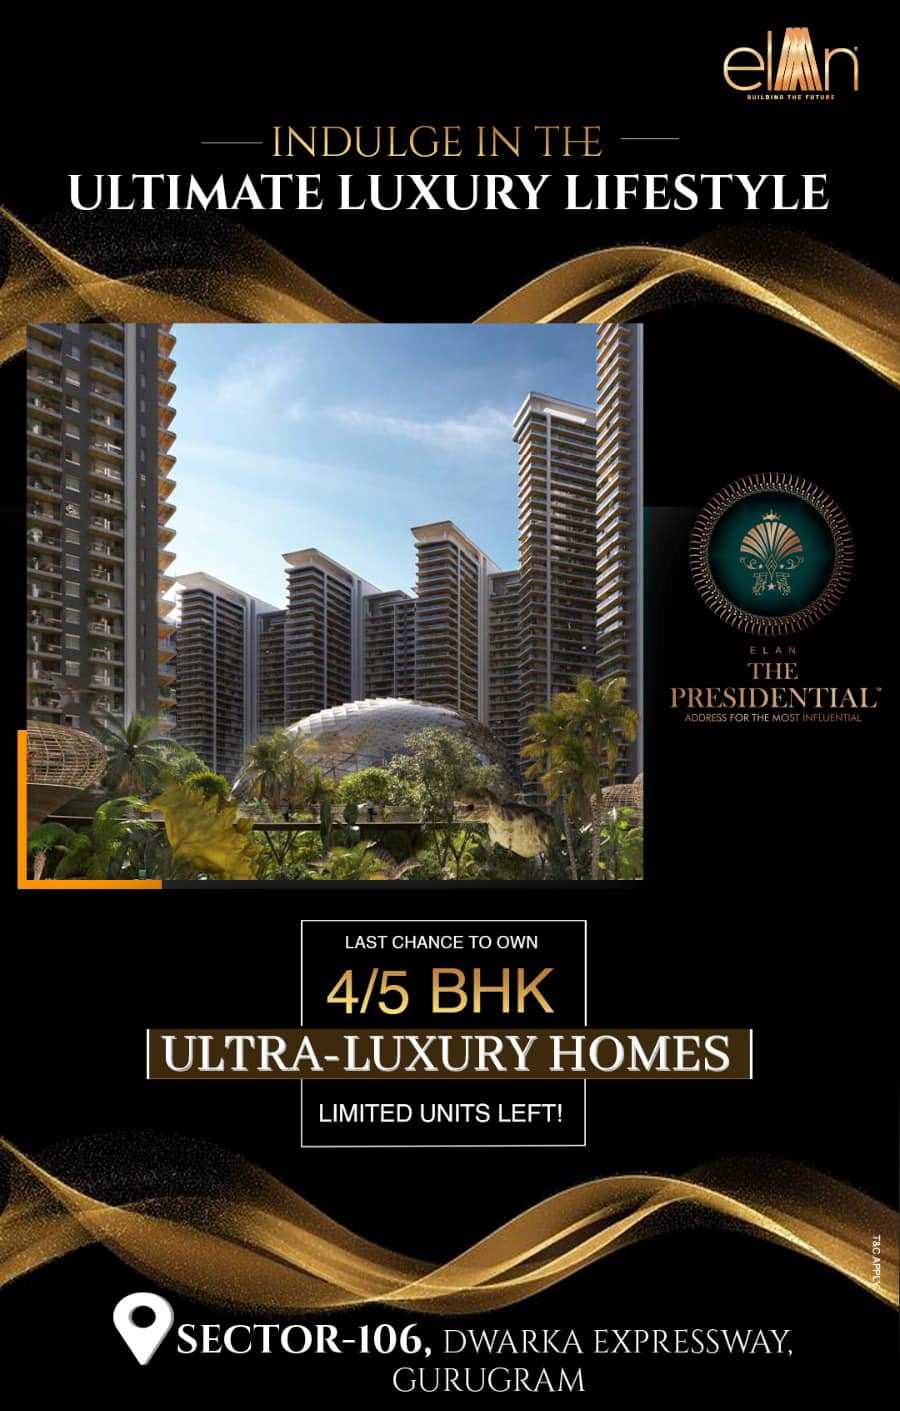 Limited units left at Elan The Presidential in Dwarka Expressway, Gurgaon Update